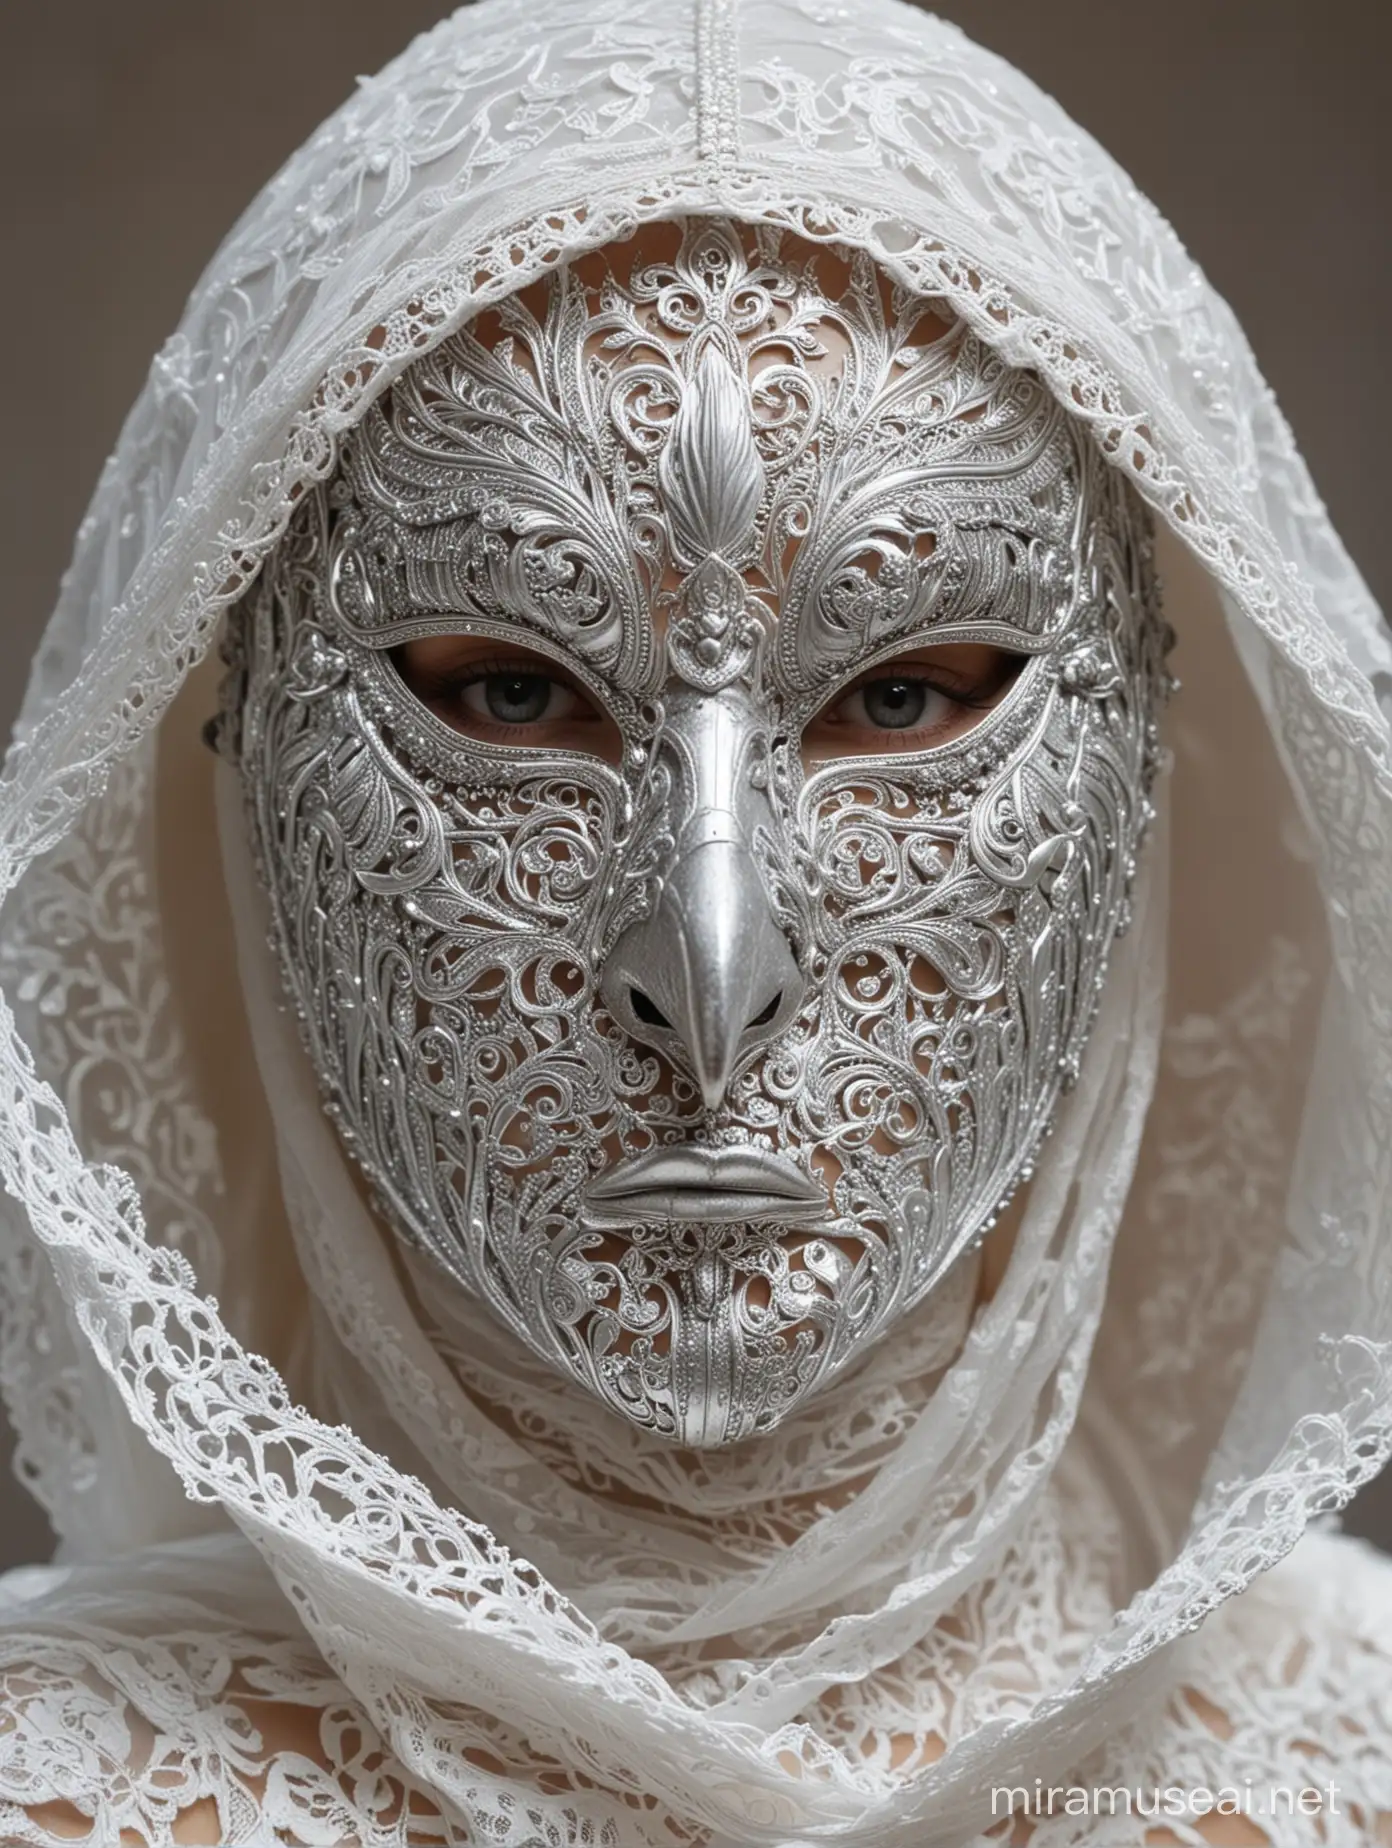 Elegant White Lace Hood with Silver Bird Mask